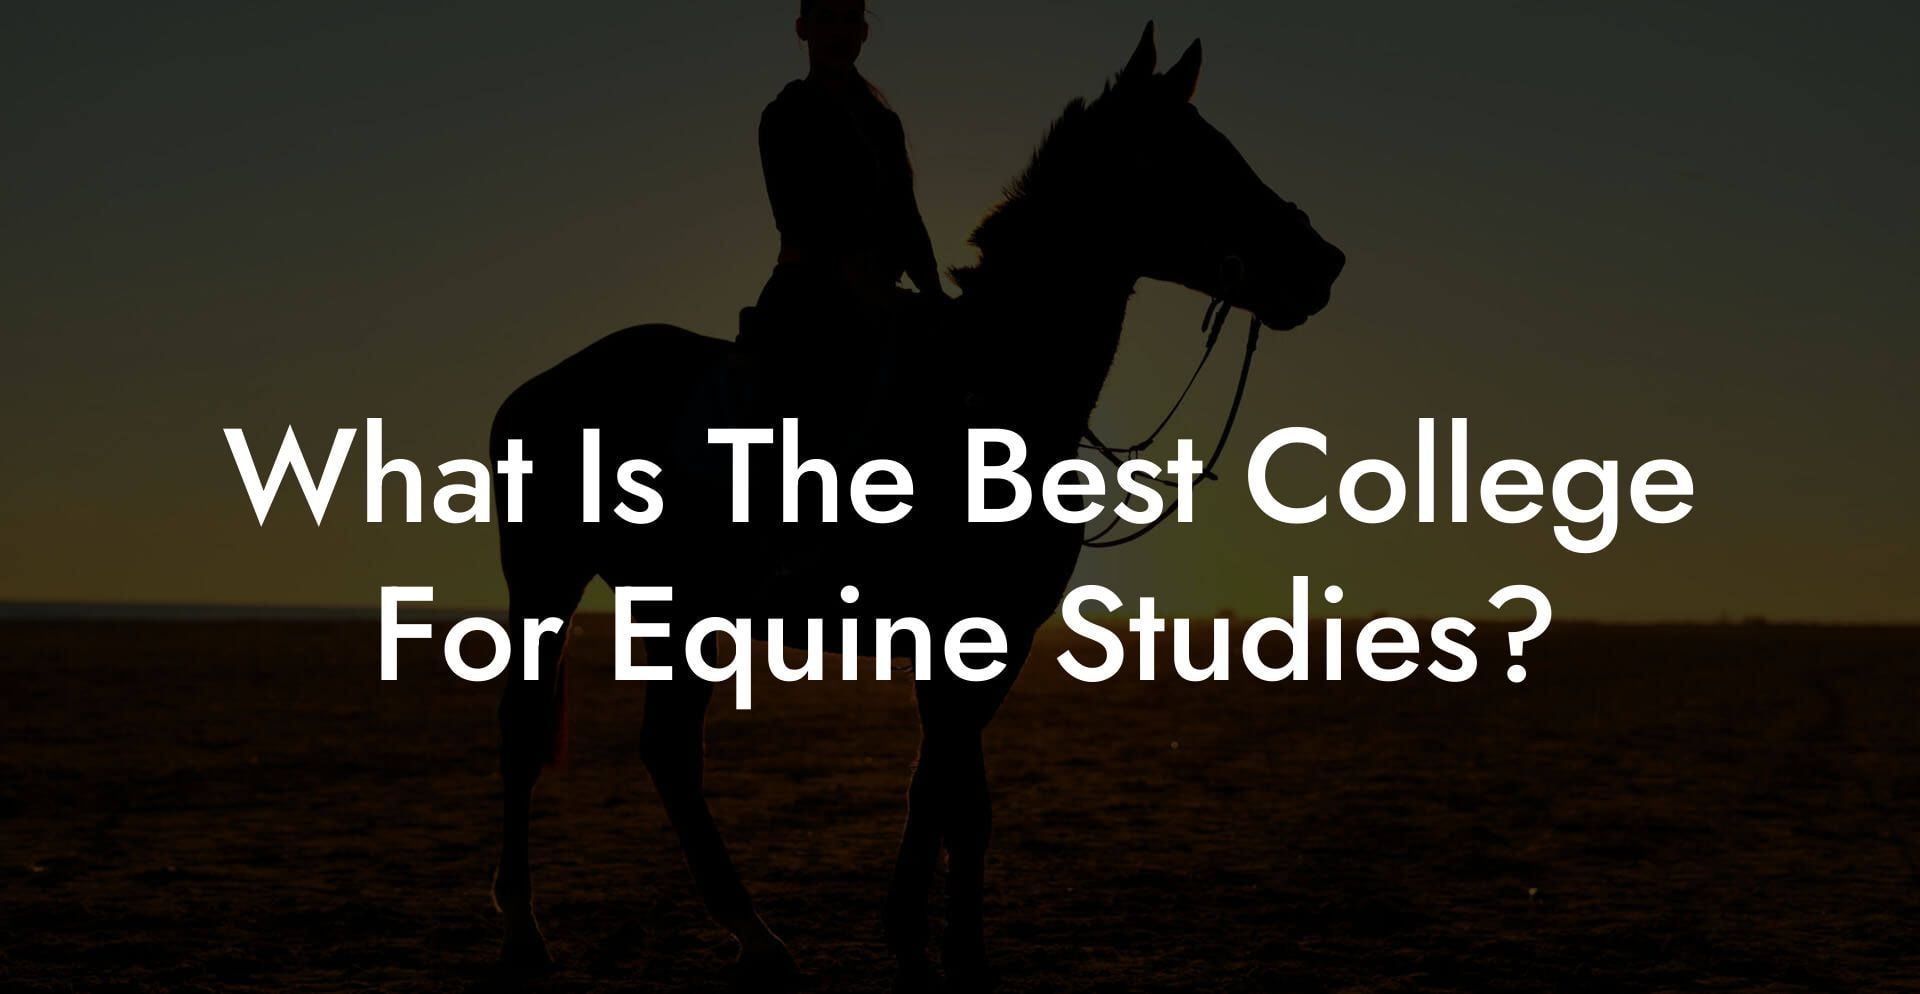 What Is The Best College For Equine Studies?